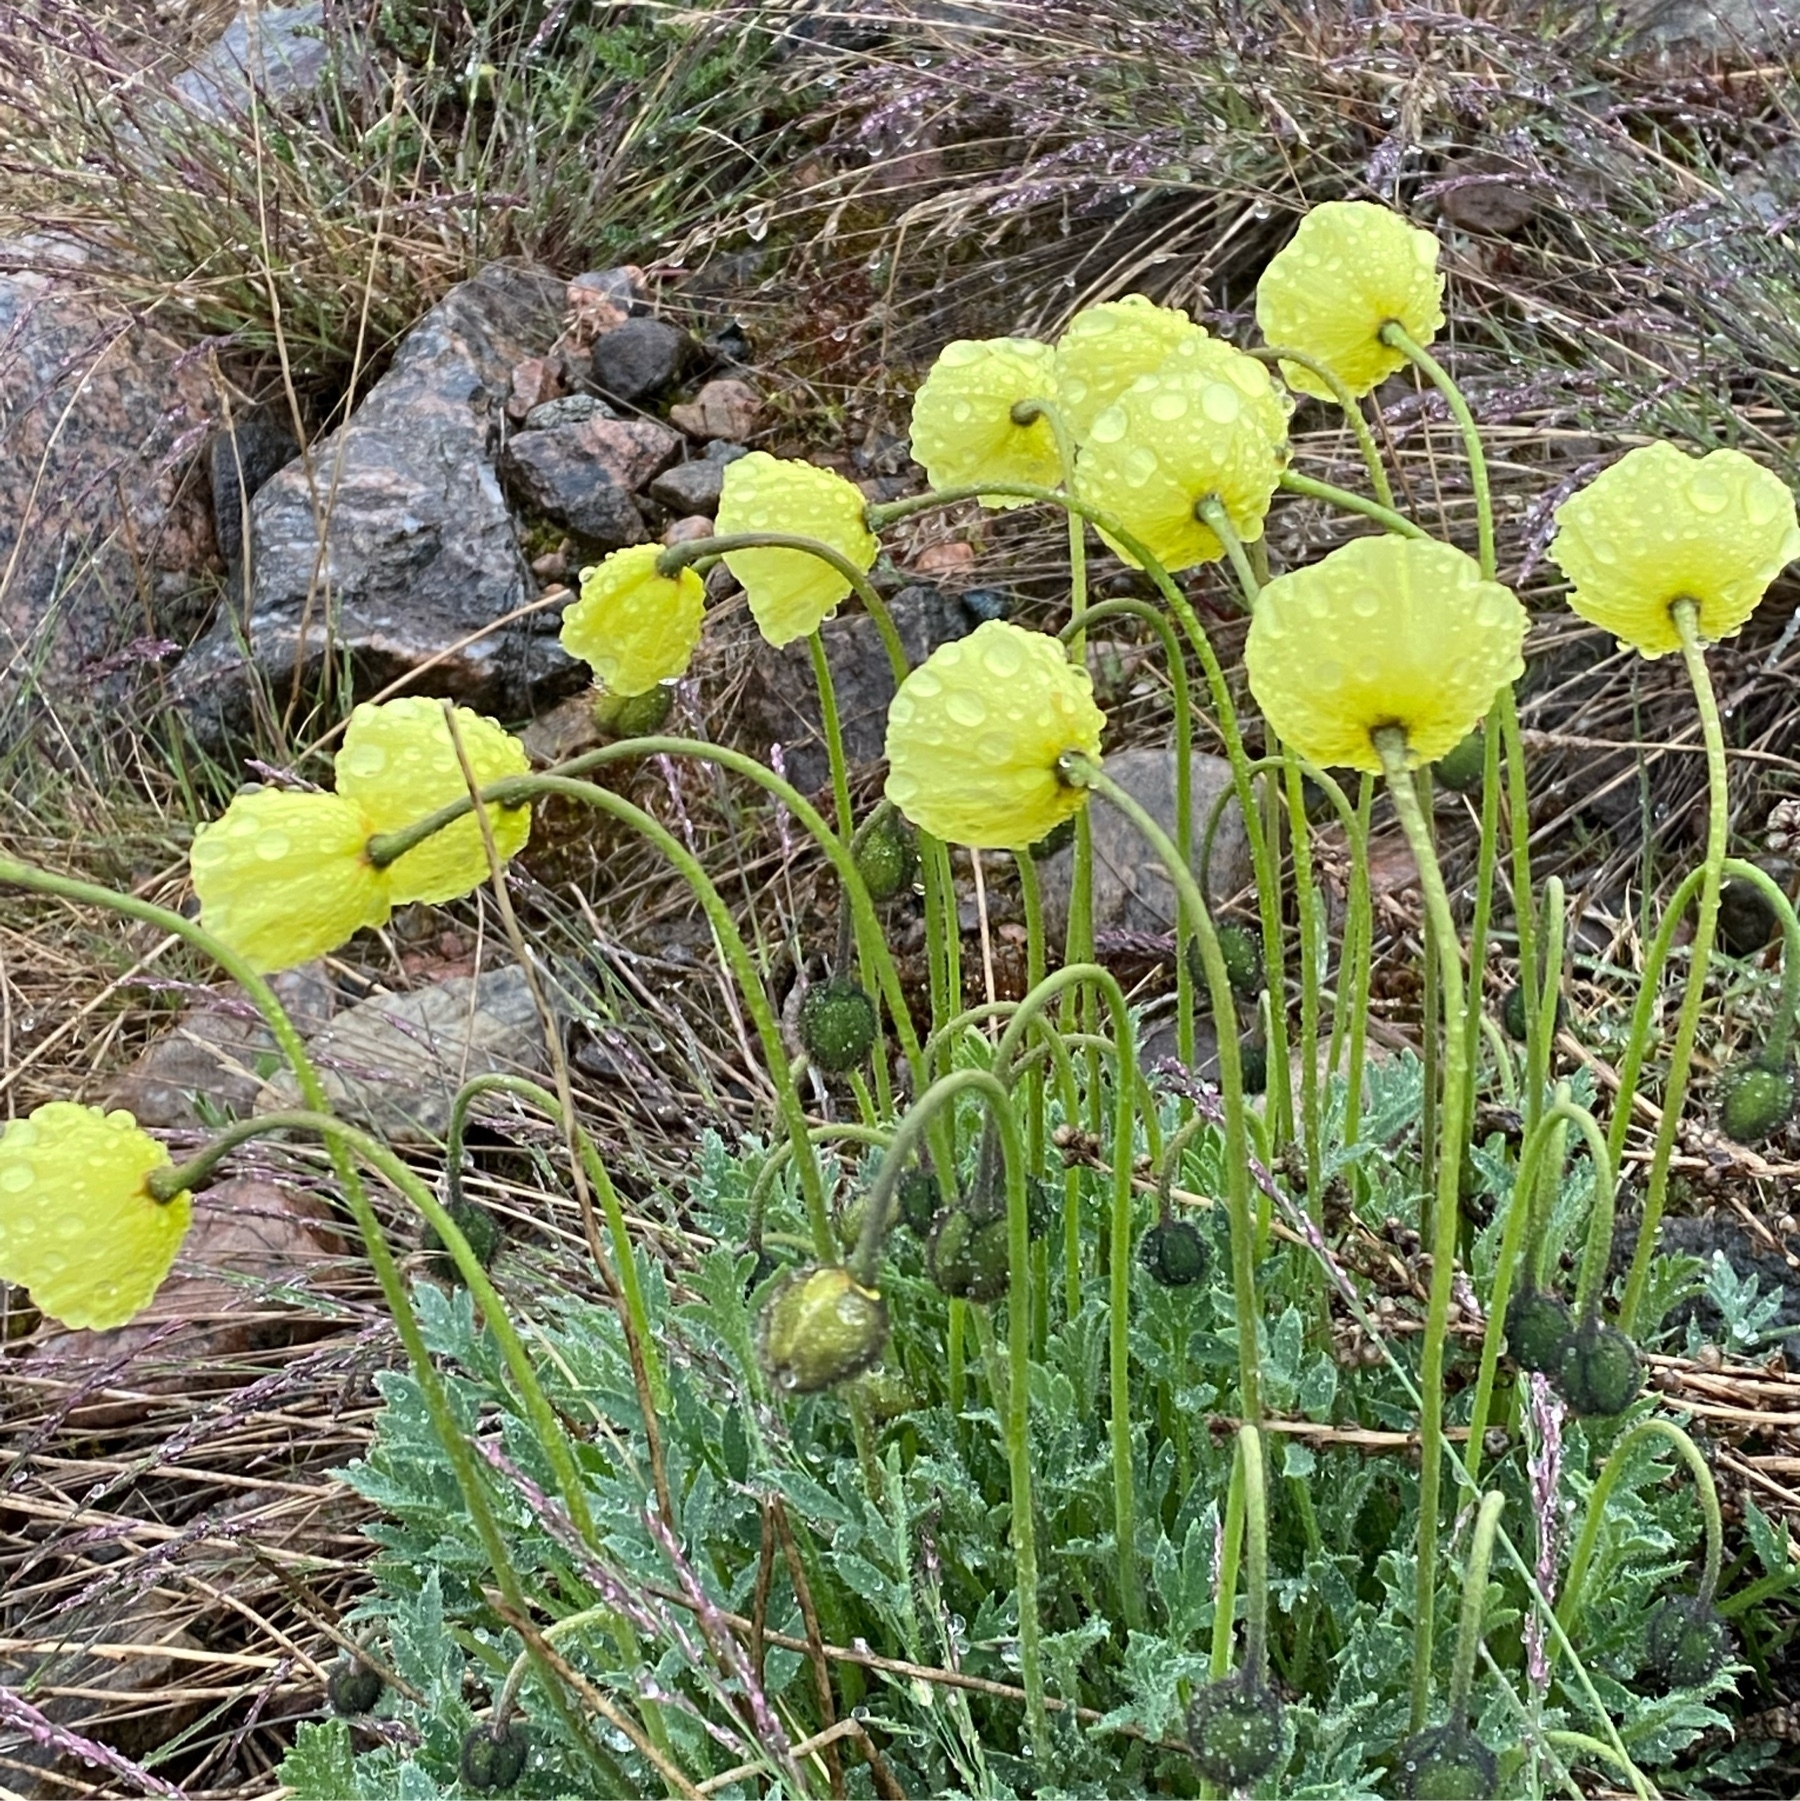 Arctic poppies turn their heads from the wind & rain